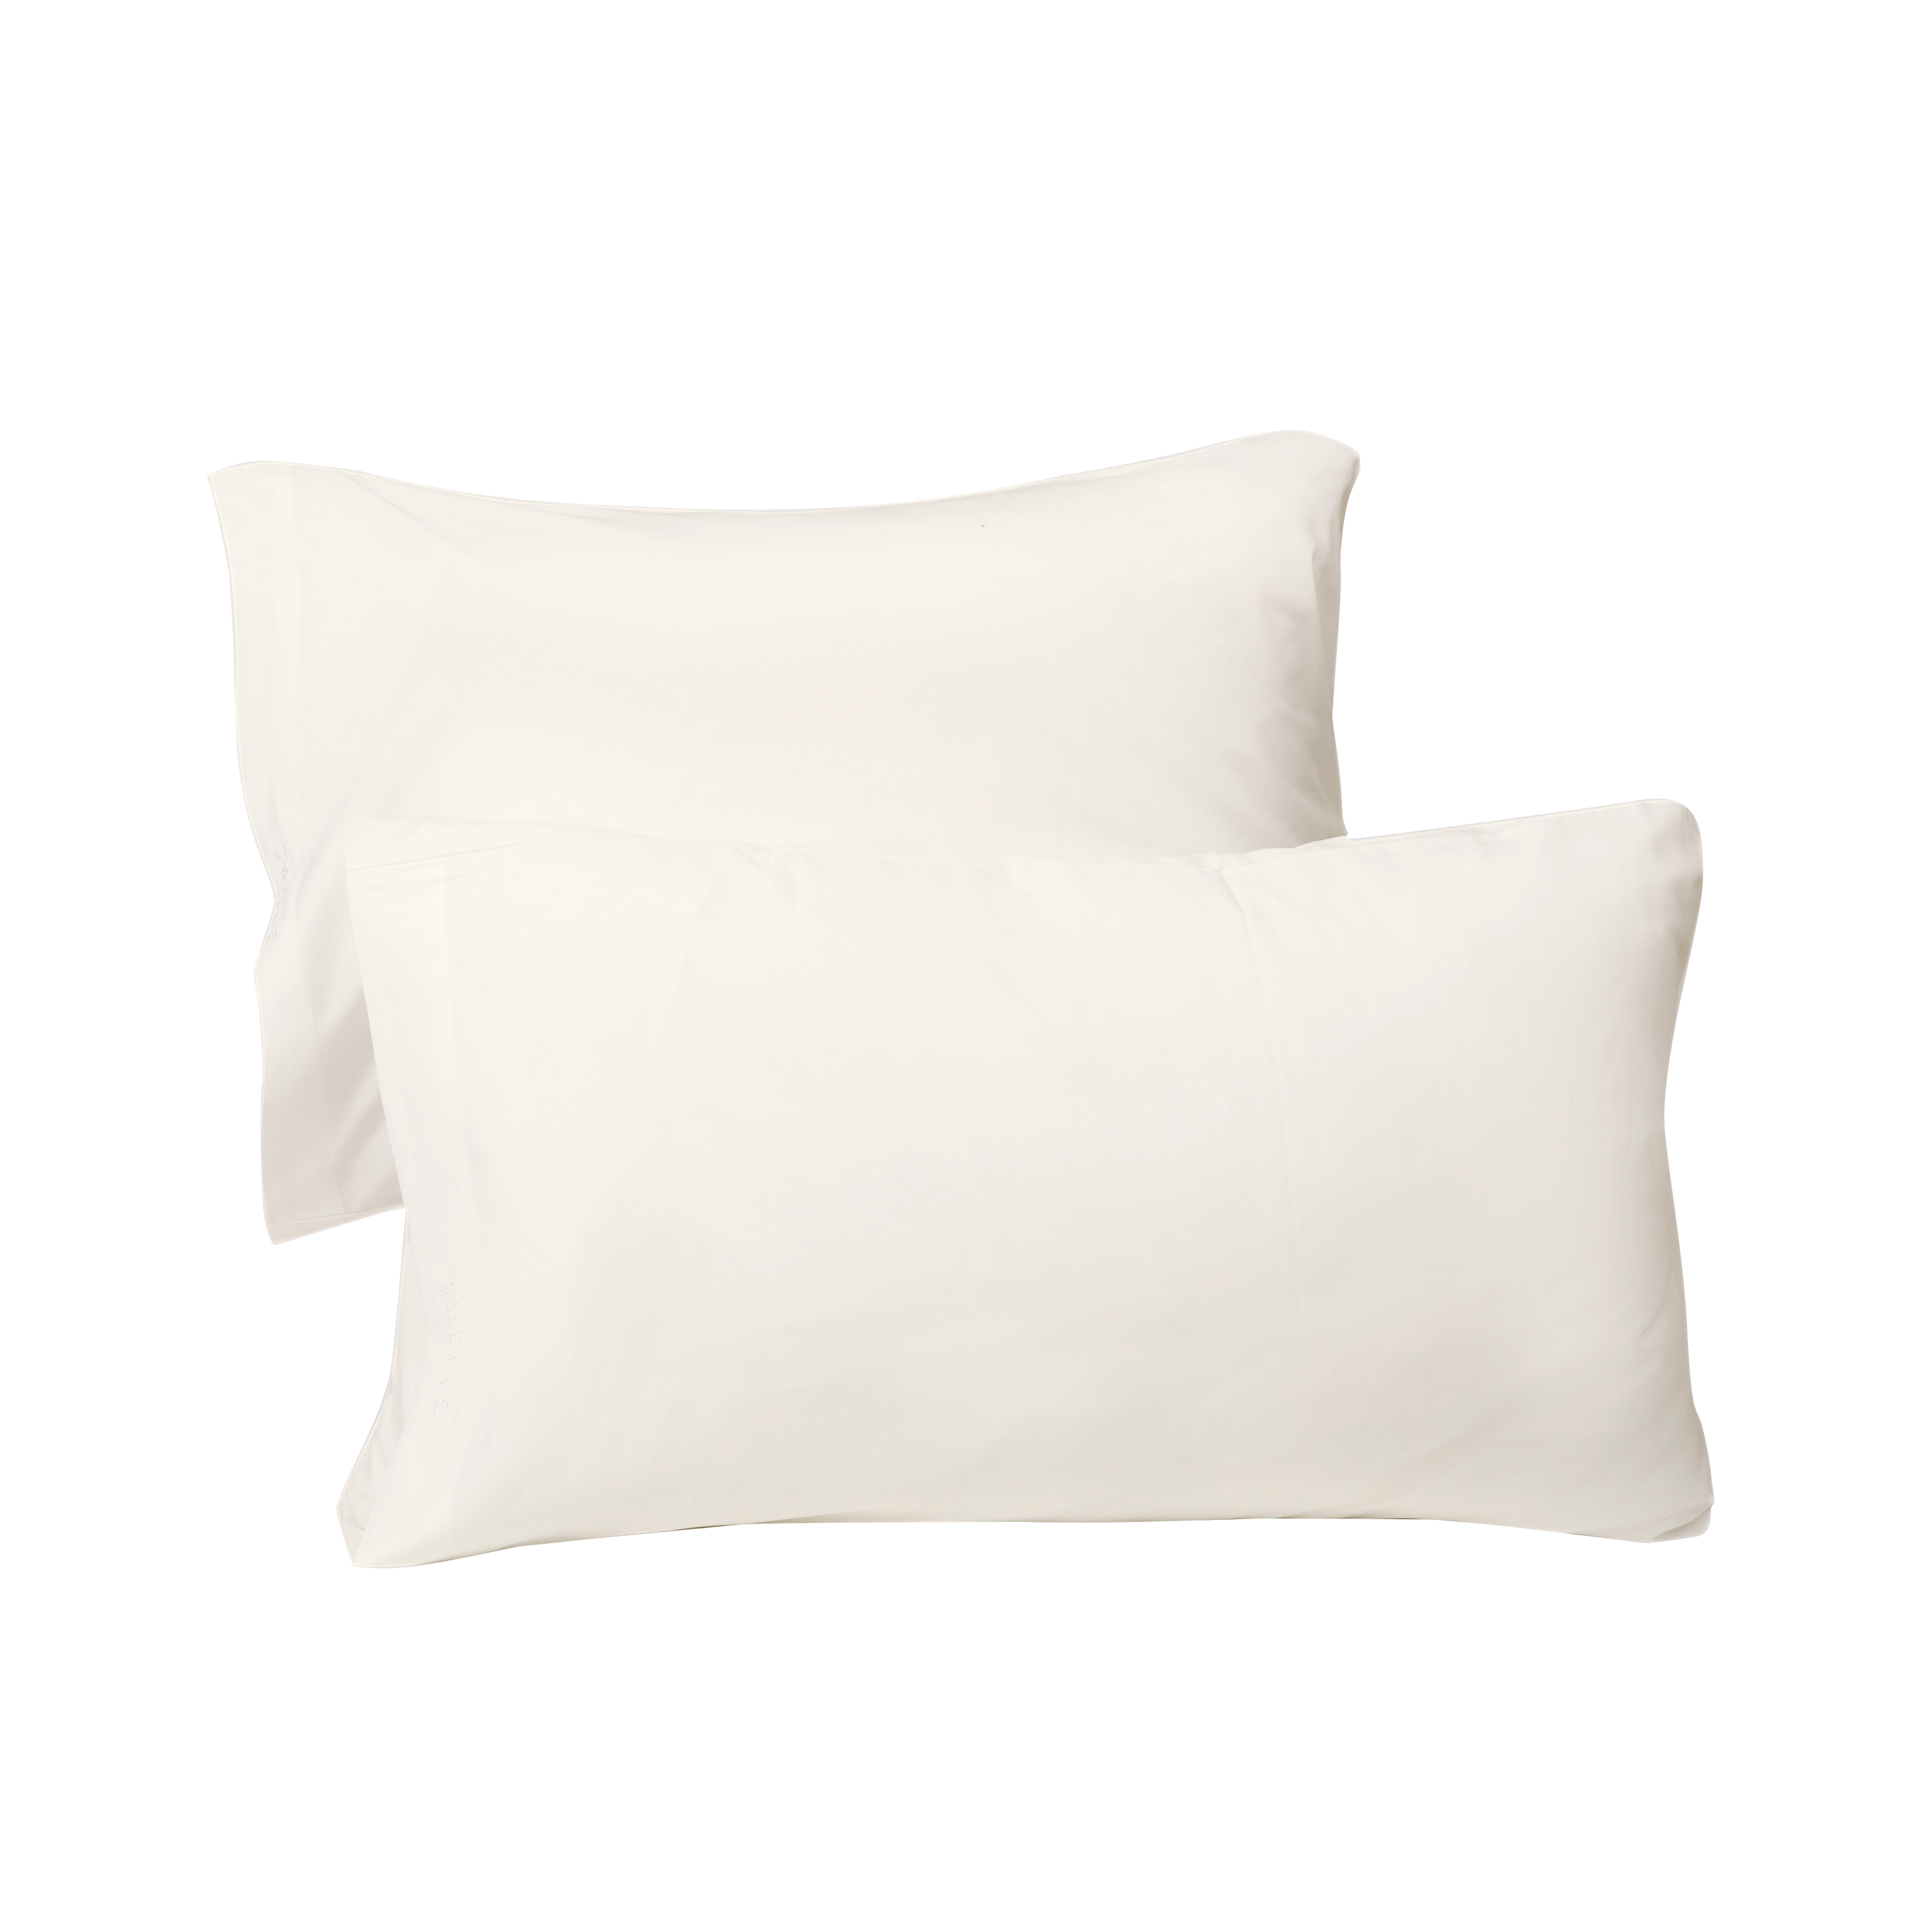 Eucalyptus Tencel Pillow Cases | Comfortably Cool, Insanely Soft